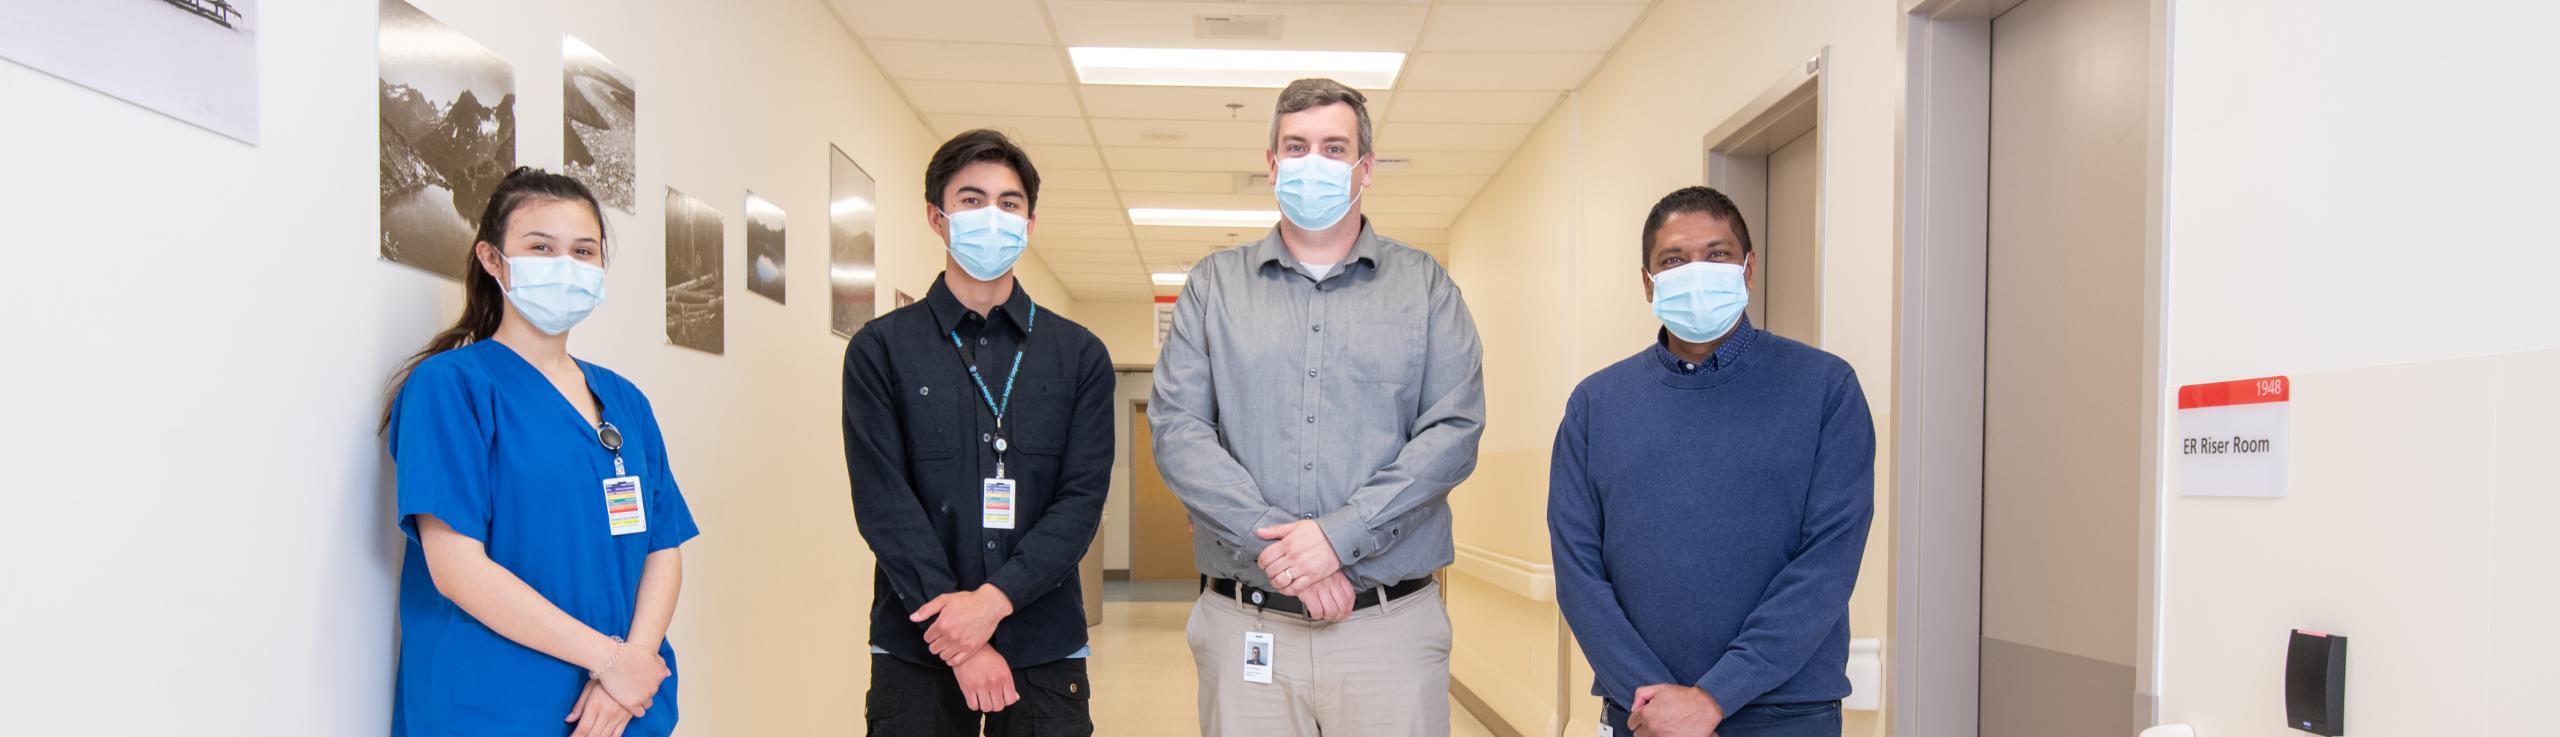 Members of the Pharmacy and Environmental Services teams at Whitehorse General Hospital